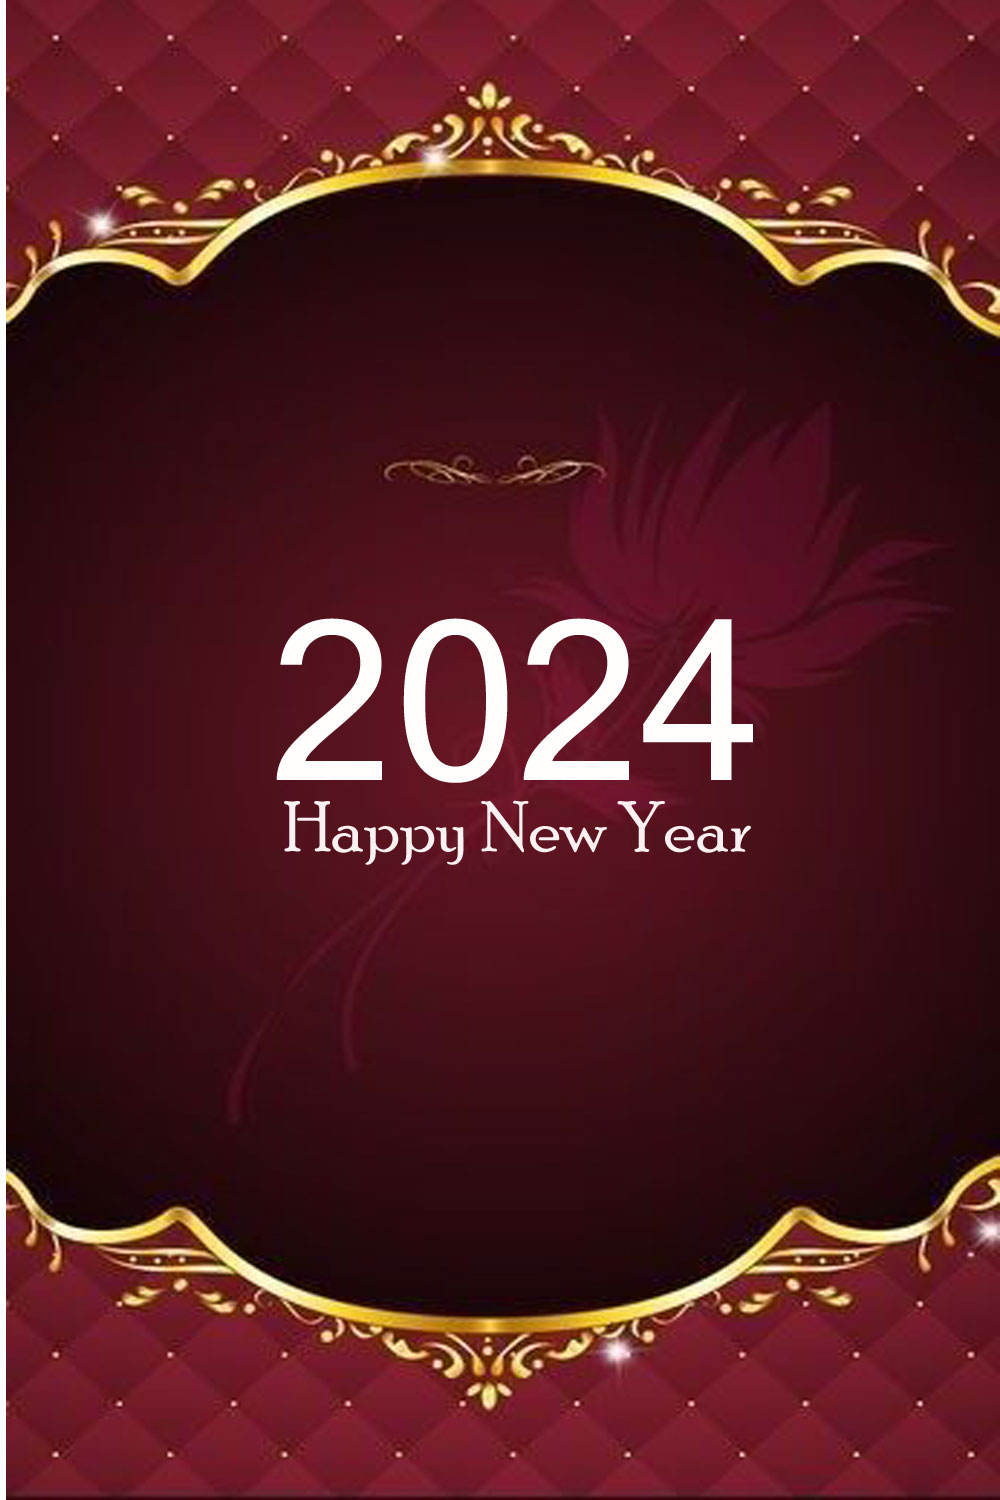 Happy New Year 2024 Stationary Image Birthday Wishes, Memes, SMS & Greeting eCard Image